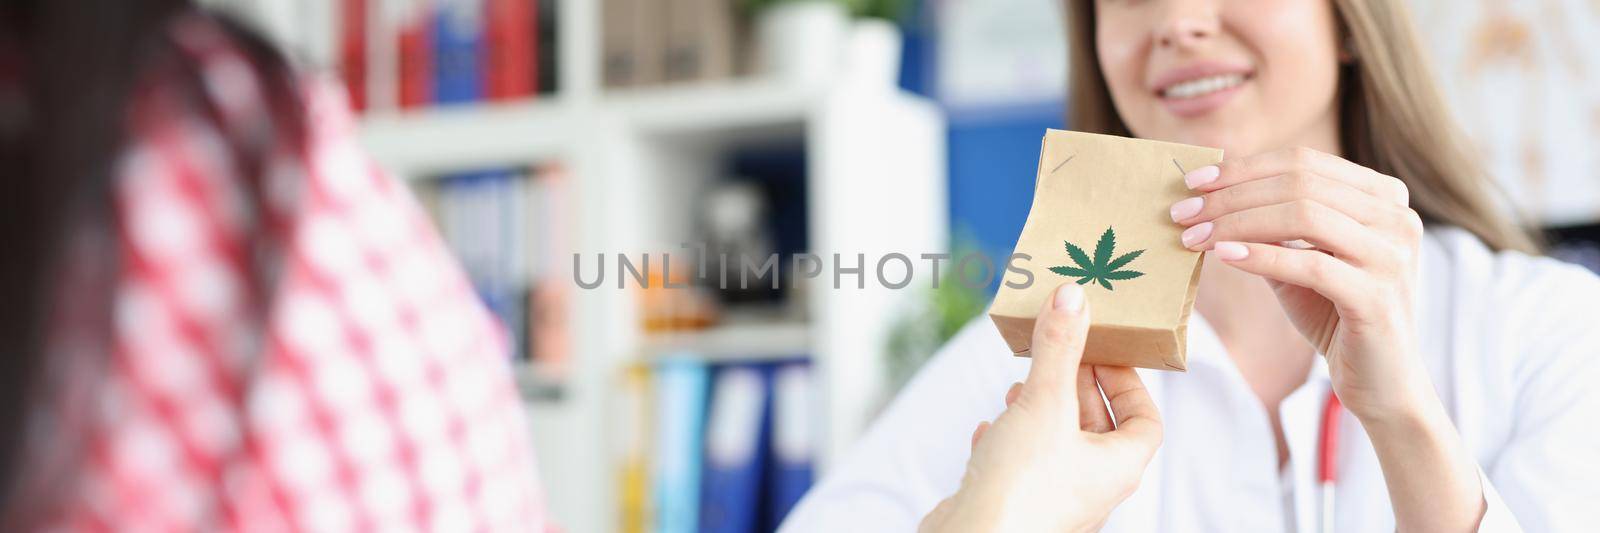 Portrait of smiling practitioner giving package with medical marijuana to female patient. Paper bag with cannabis sign. Narcotic pain relievers concept